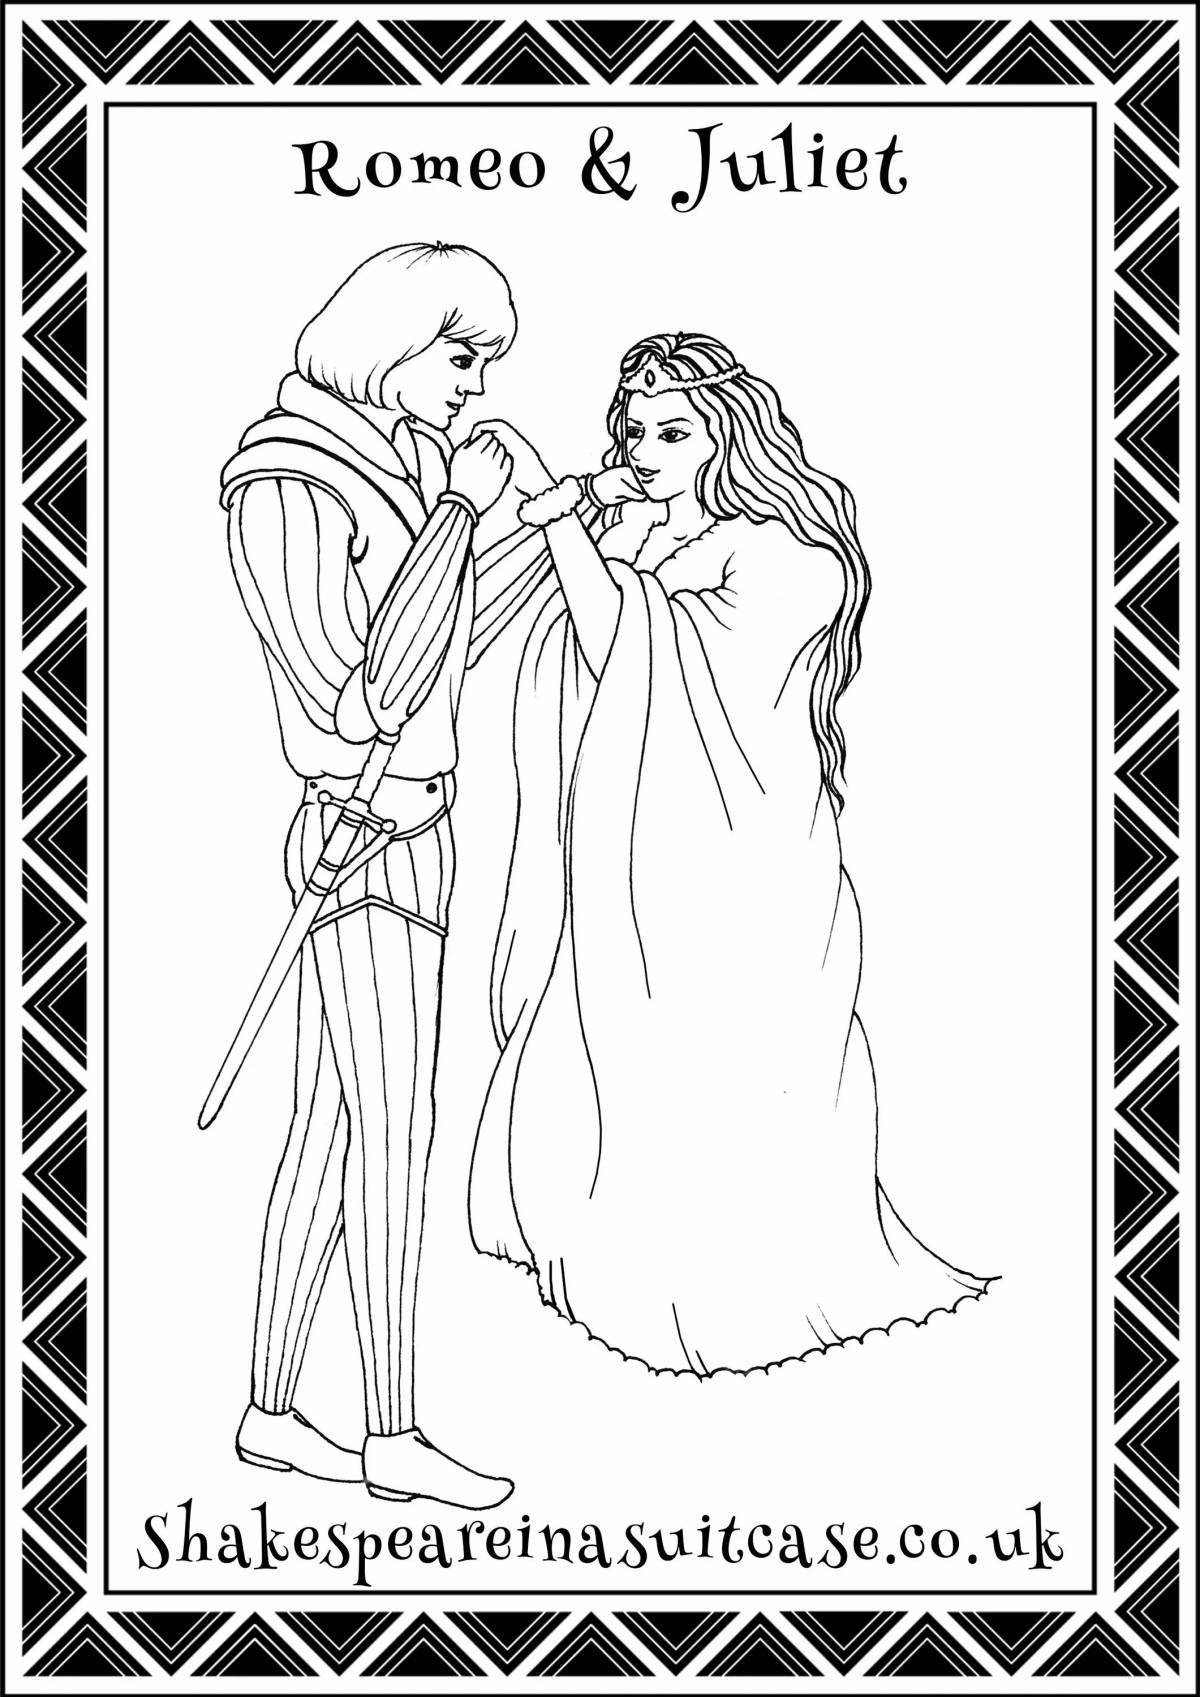 Violent romeo and juliet coloring book